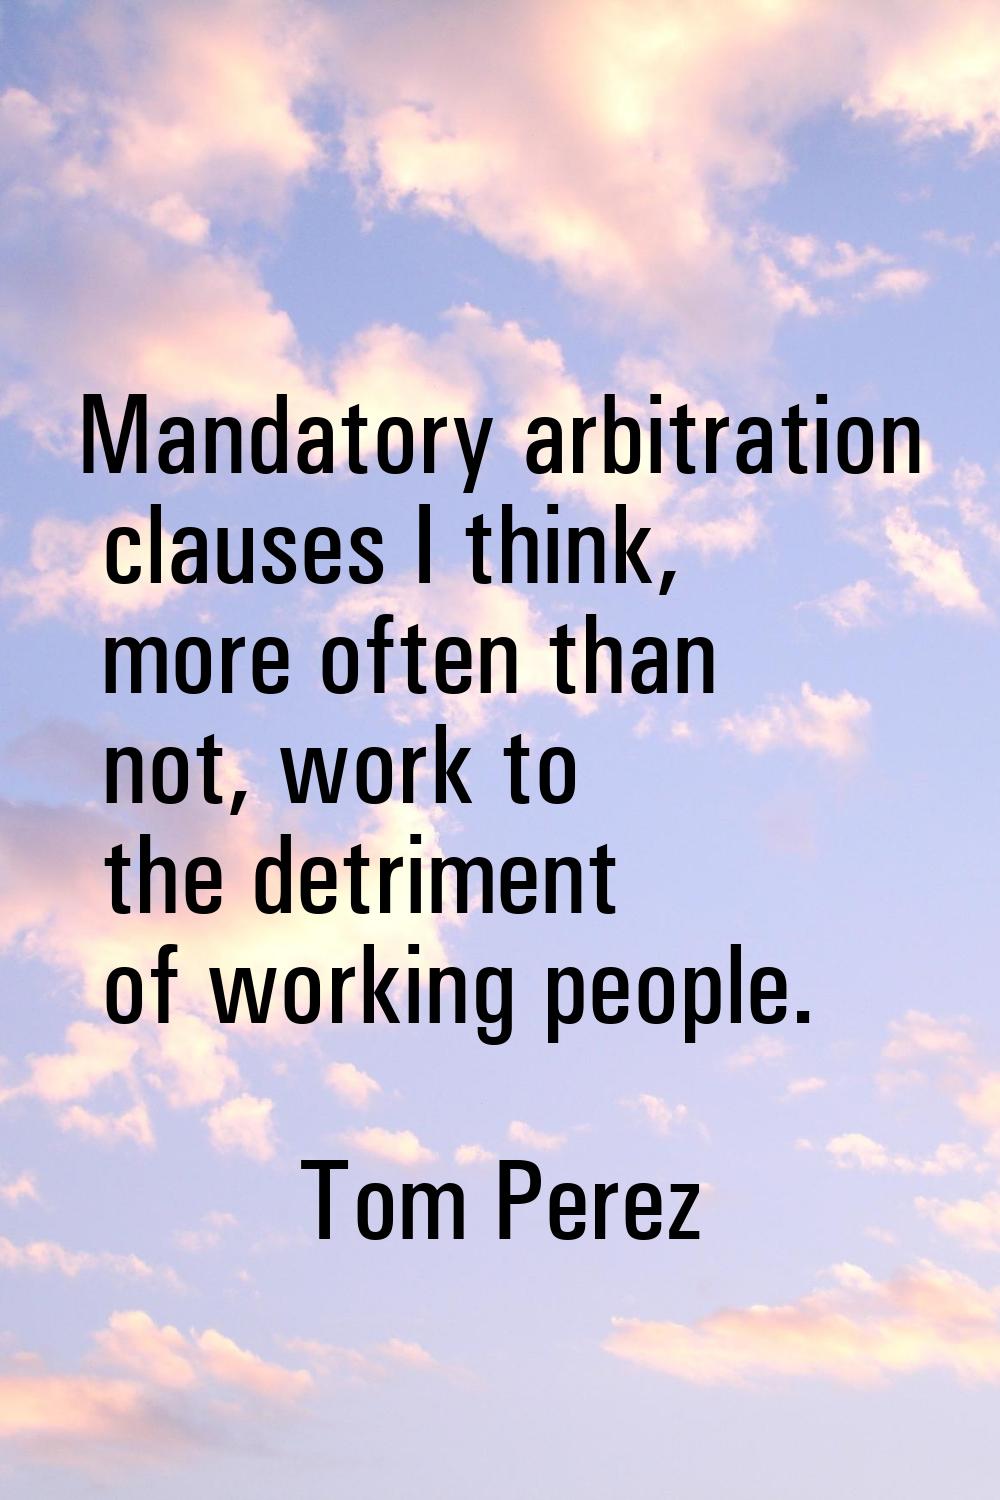 Mandatory arbitration clauses I think, more often than not, work to the detriment of working people